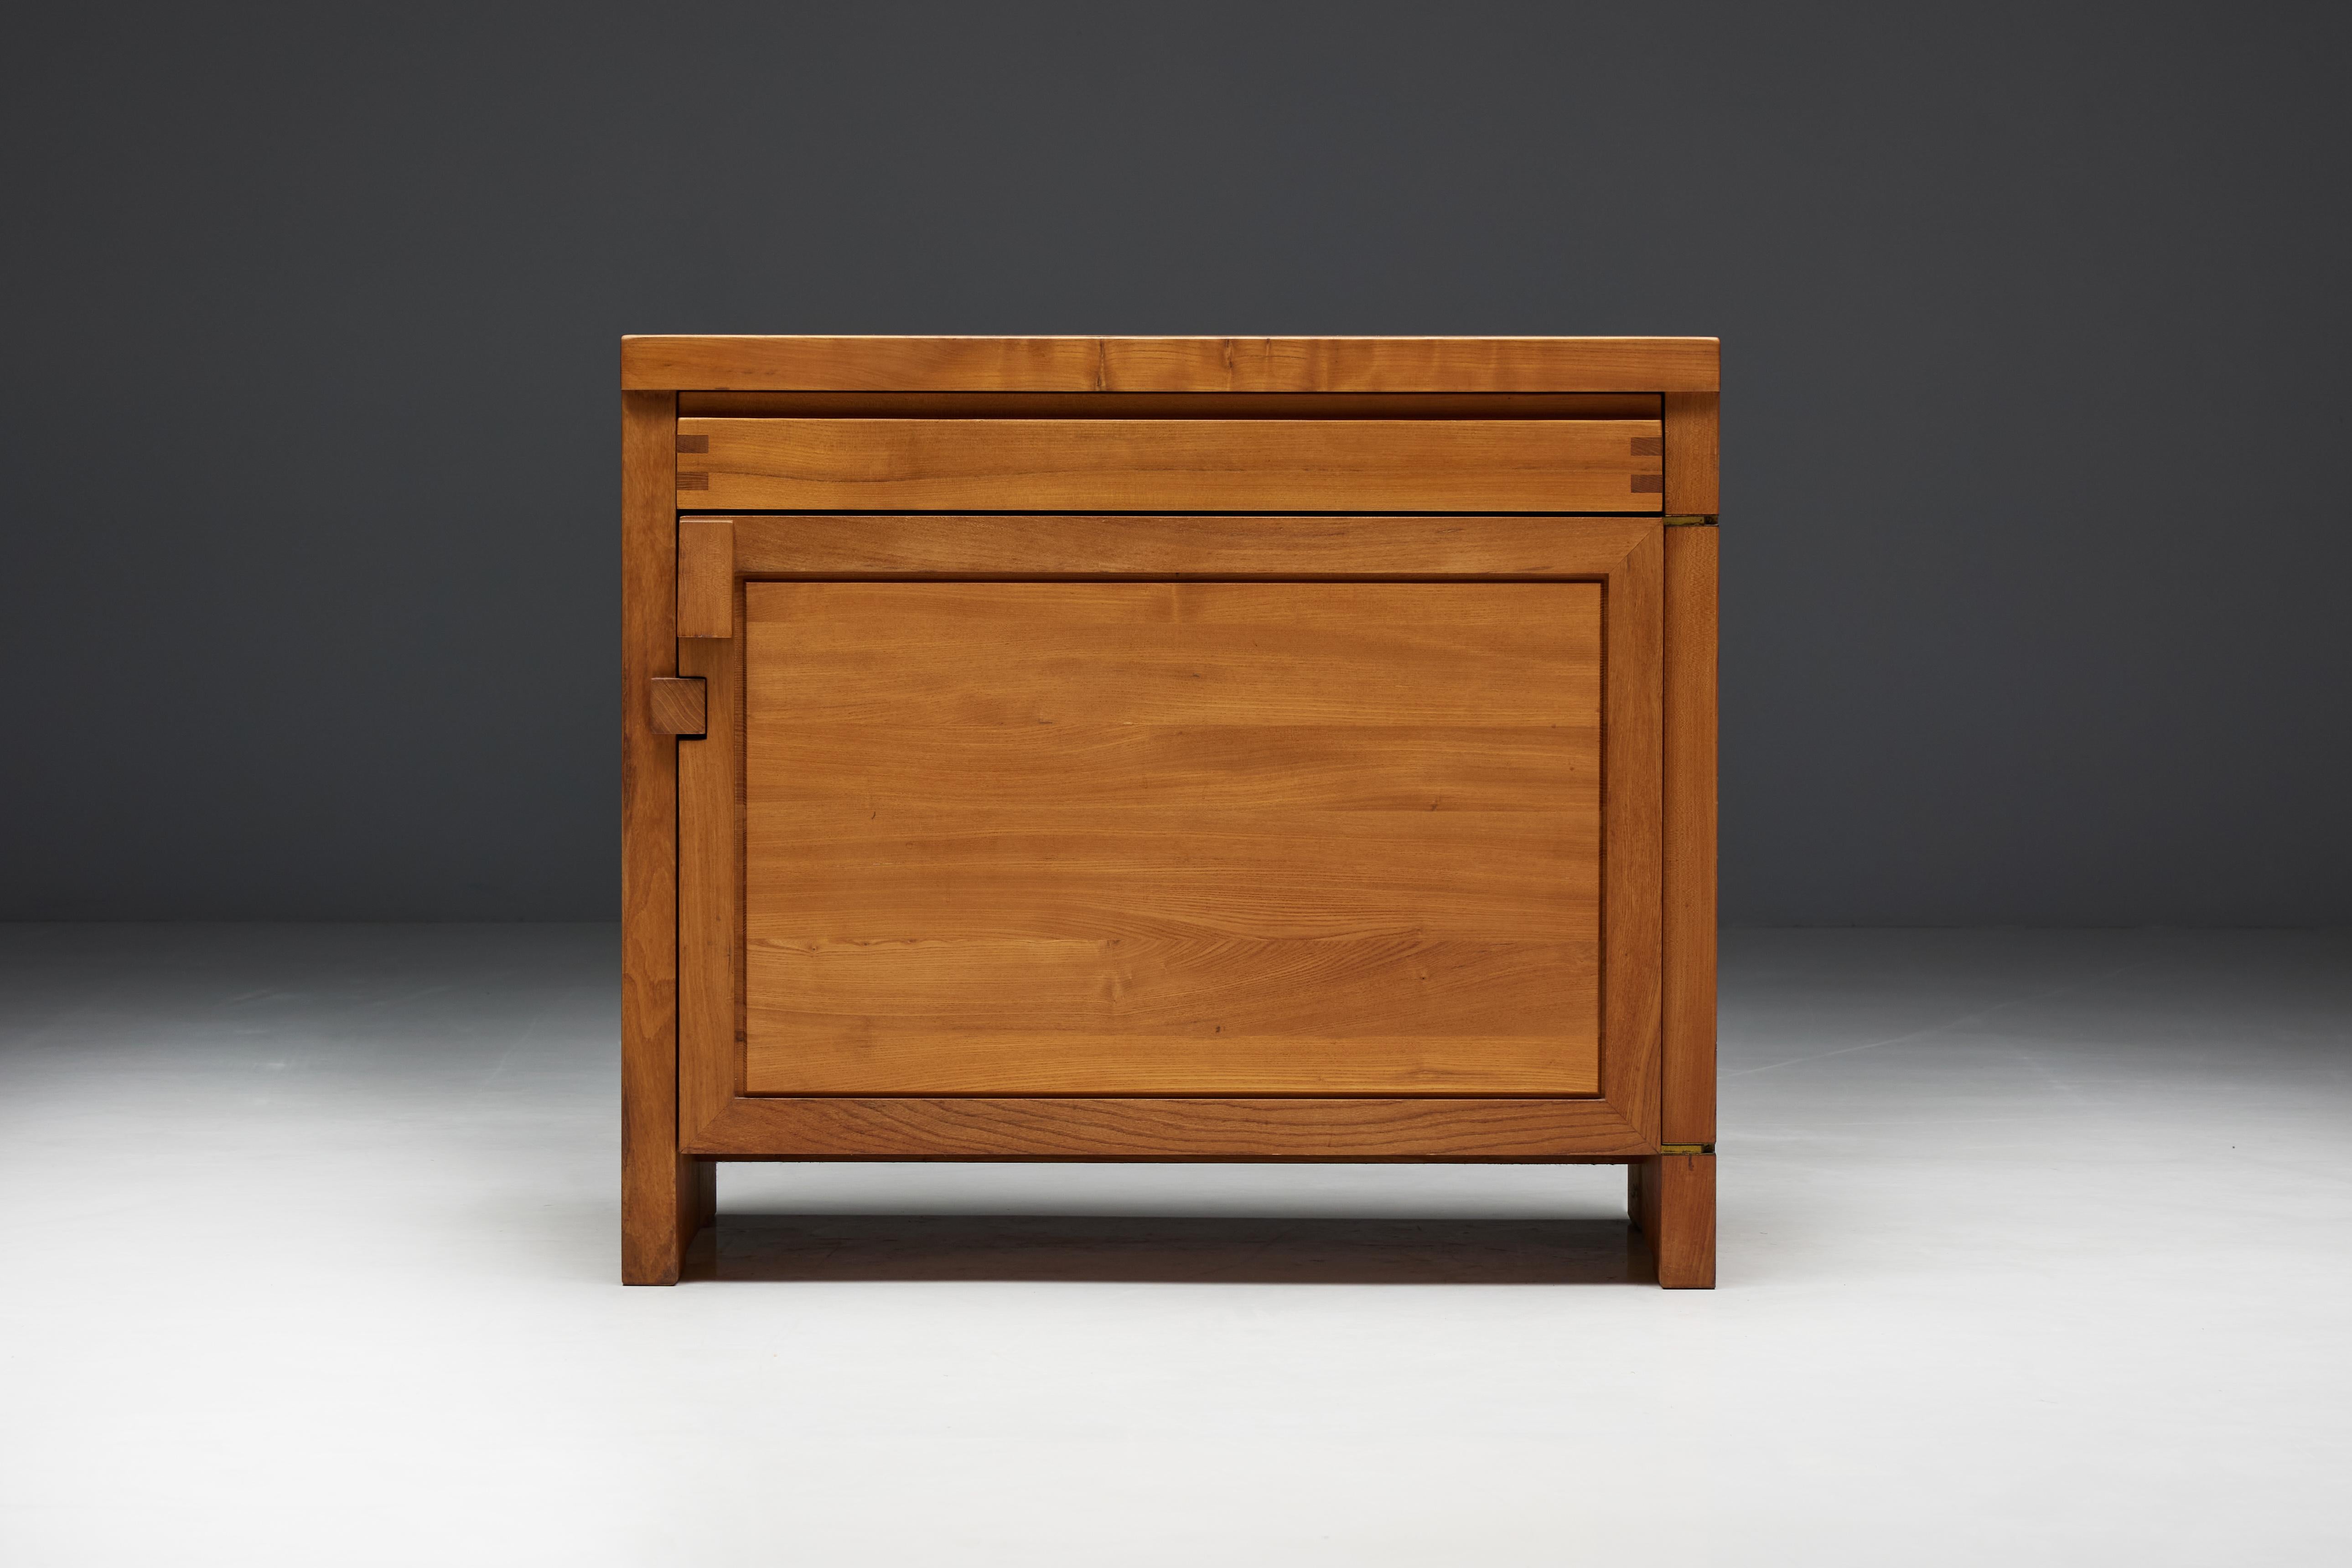 R09B cabinet by Pierre Chapo, a rare gem from 1970s France. Crafted with precision from solid elm, this small cabinet is adorned with remarkable joint connections that showcase the masterful artistry of Pierre Chapo. The charming patina enhances the